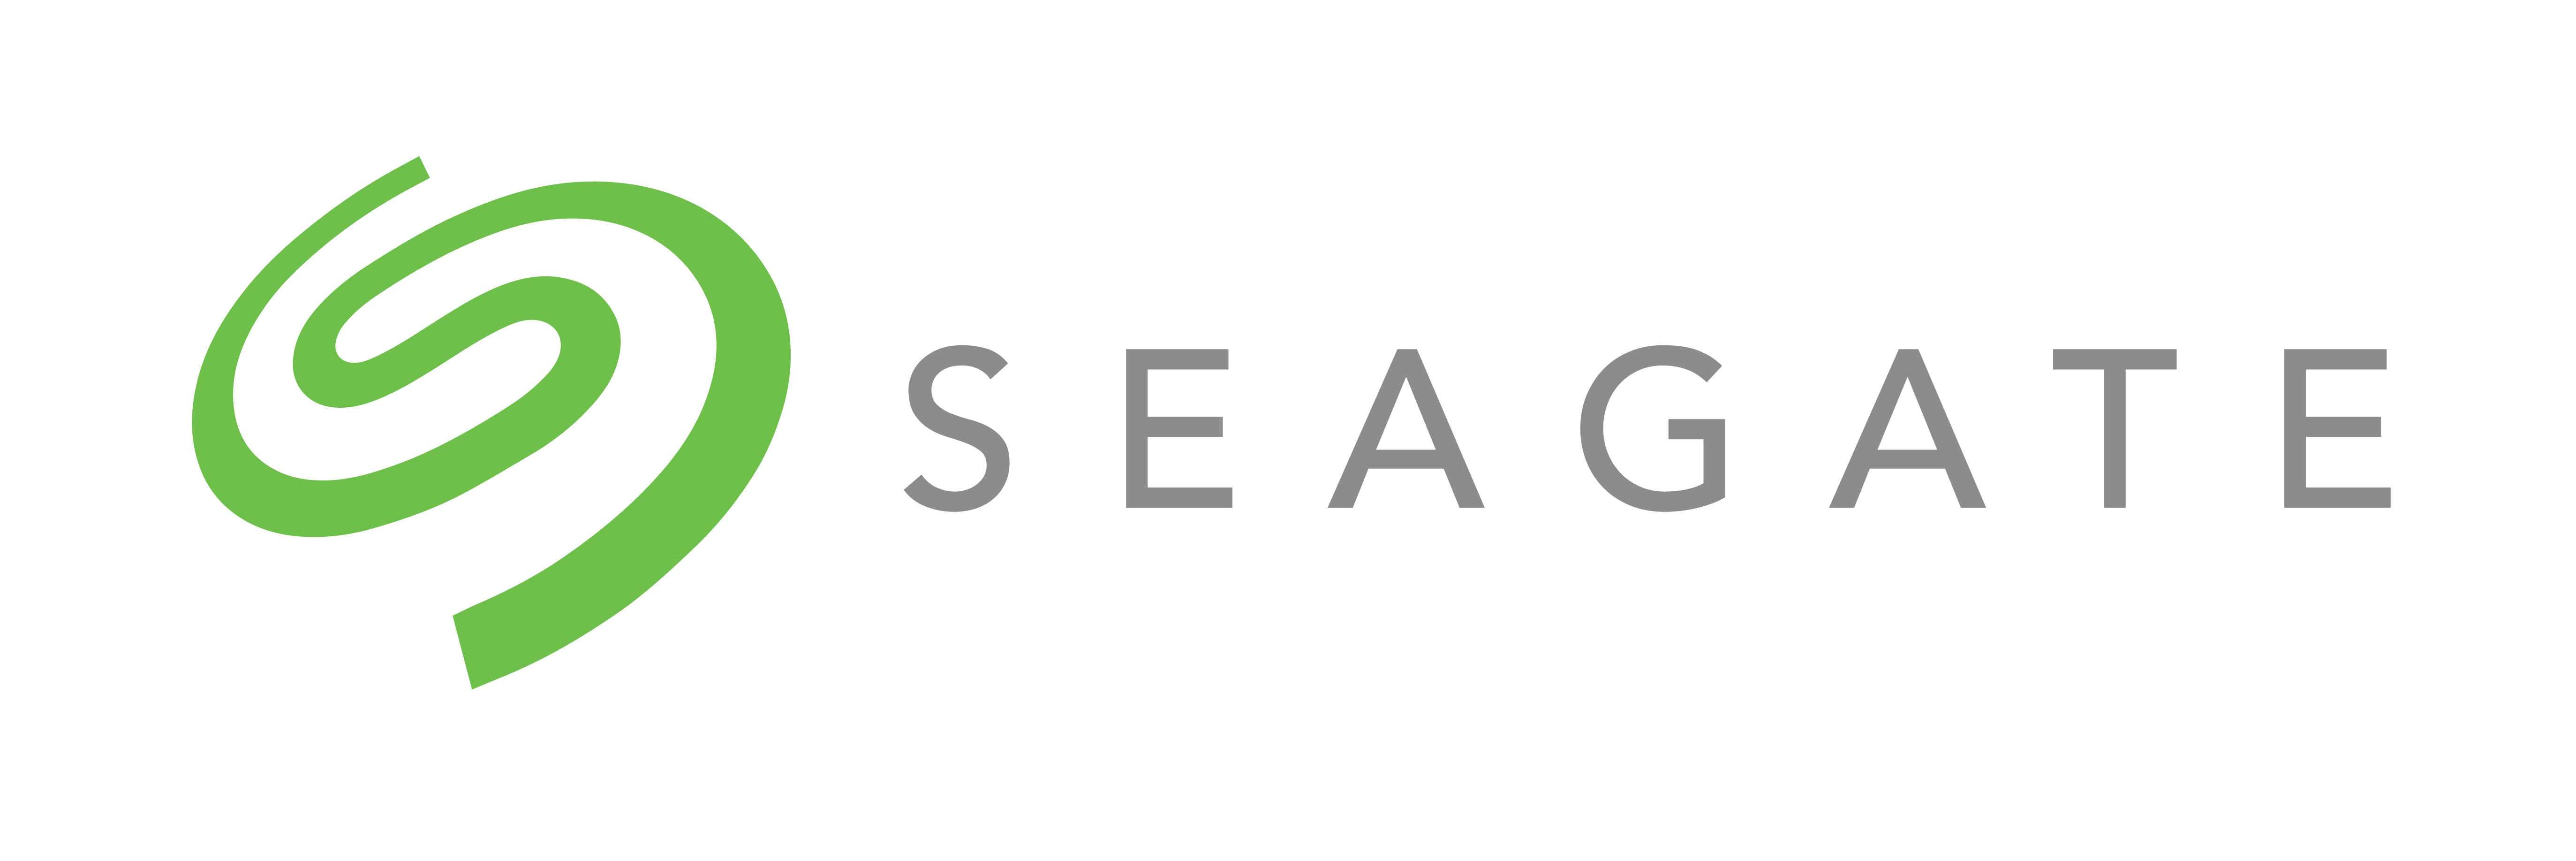 Image result for seagate